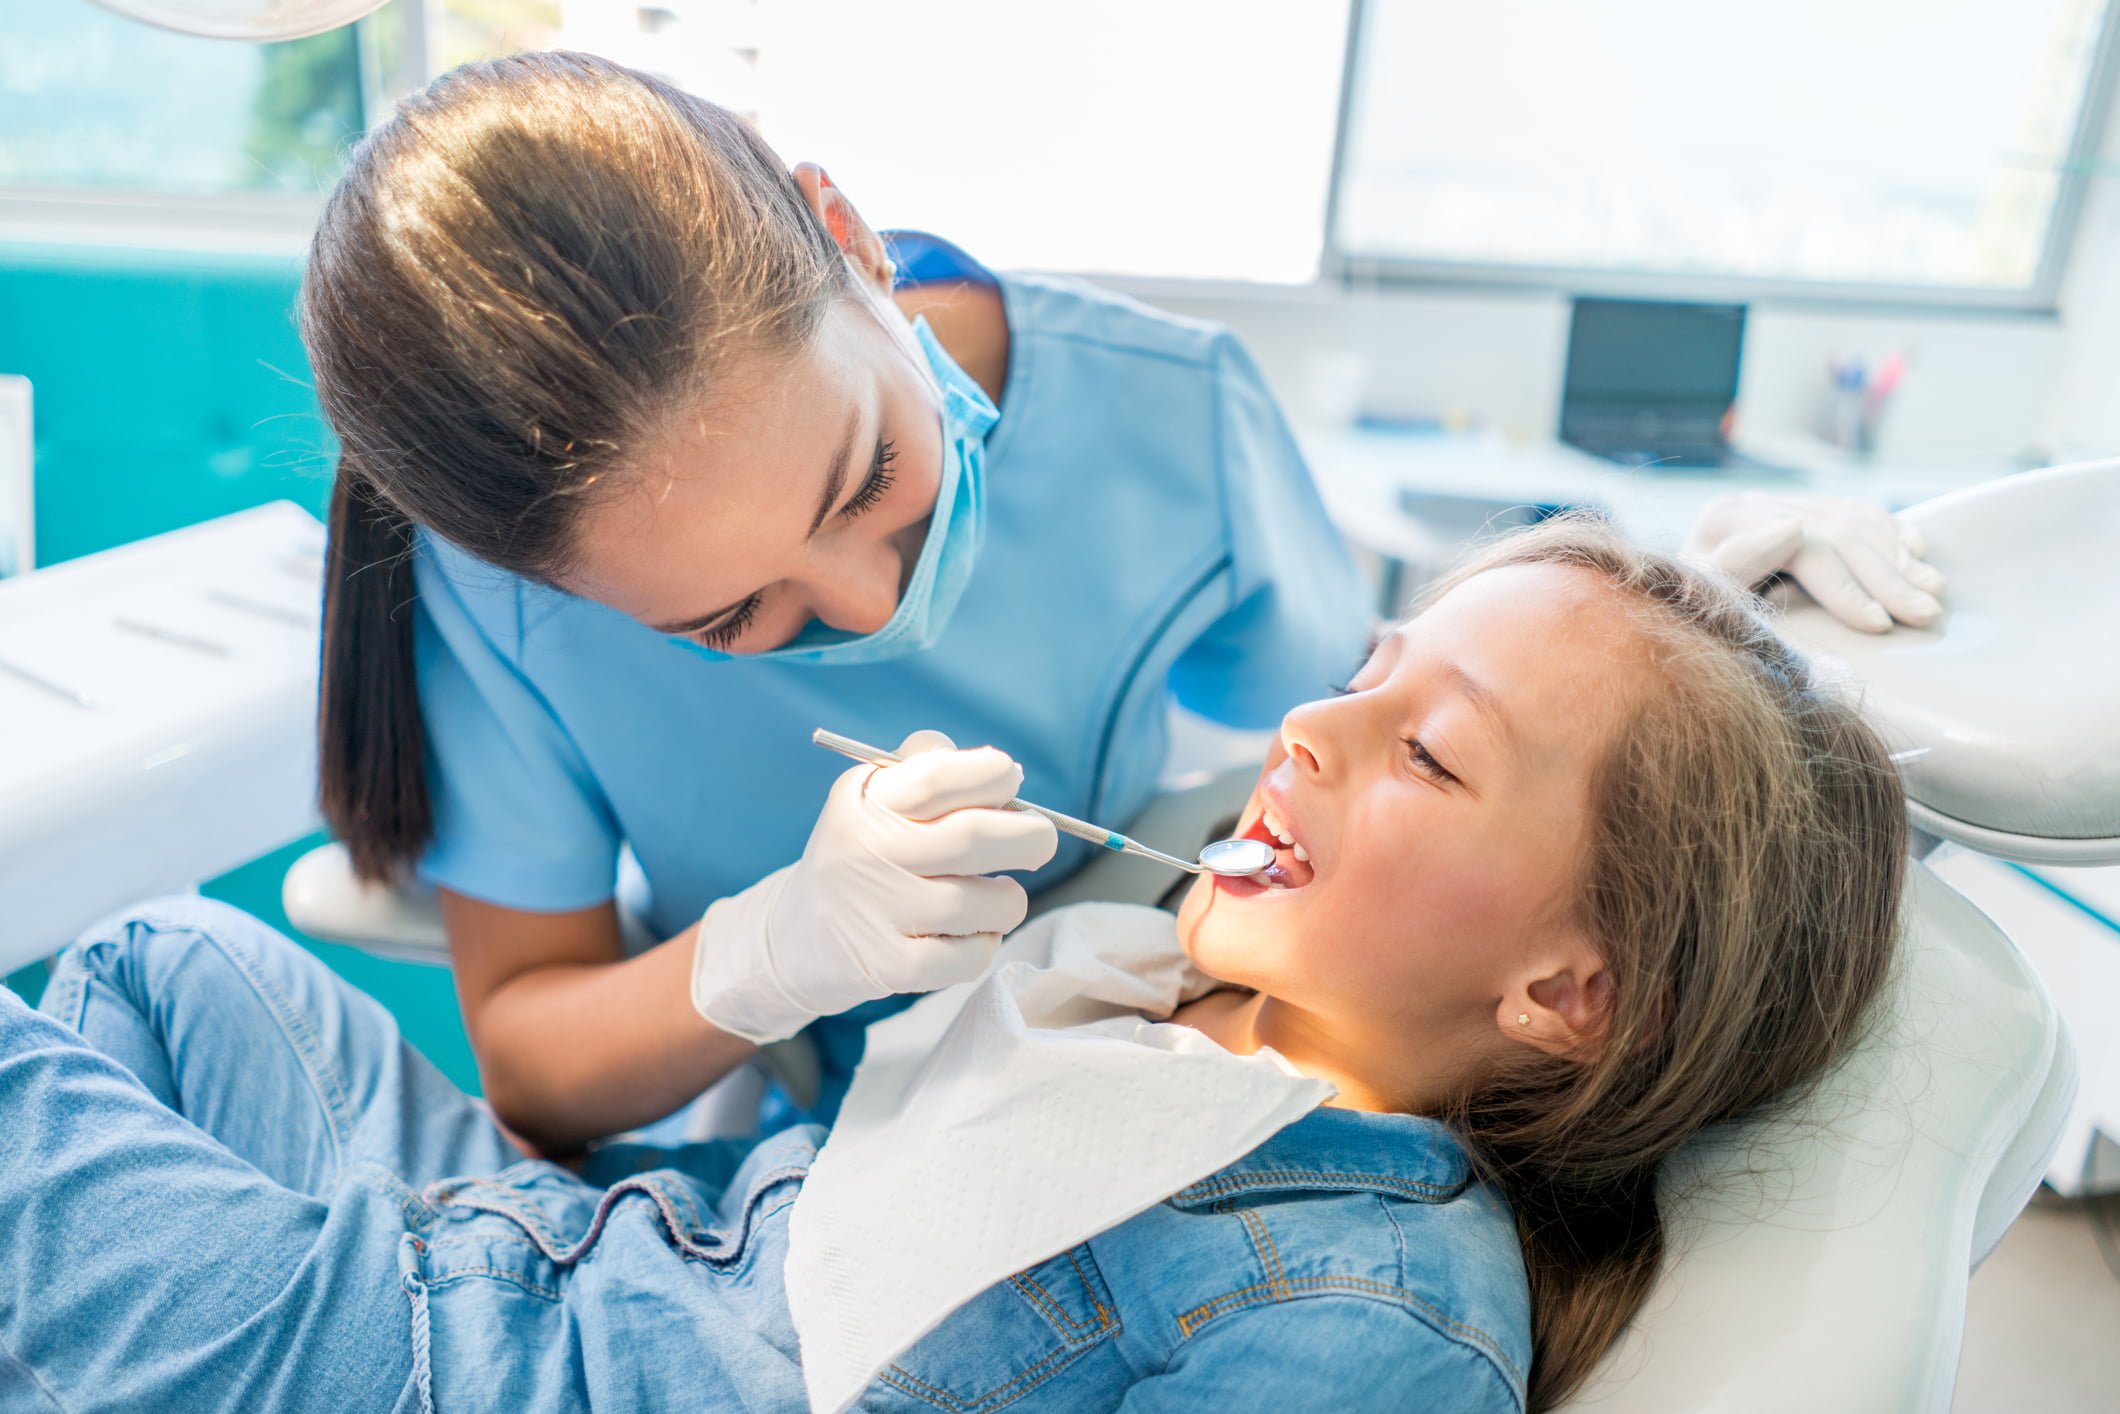 Nordic Dentistry: Providing Exceptional Care for Children’s Dental Health